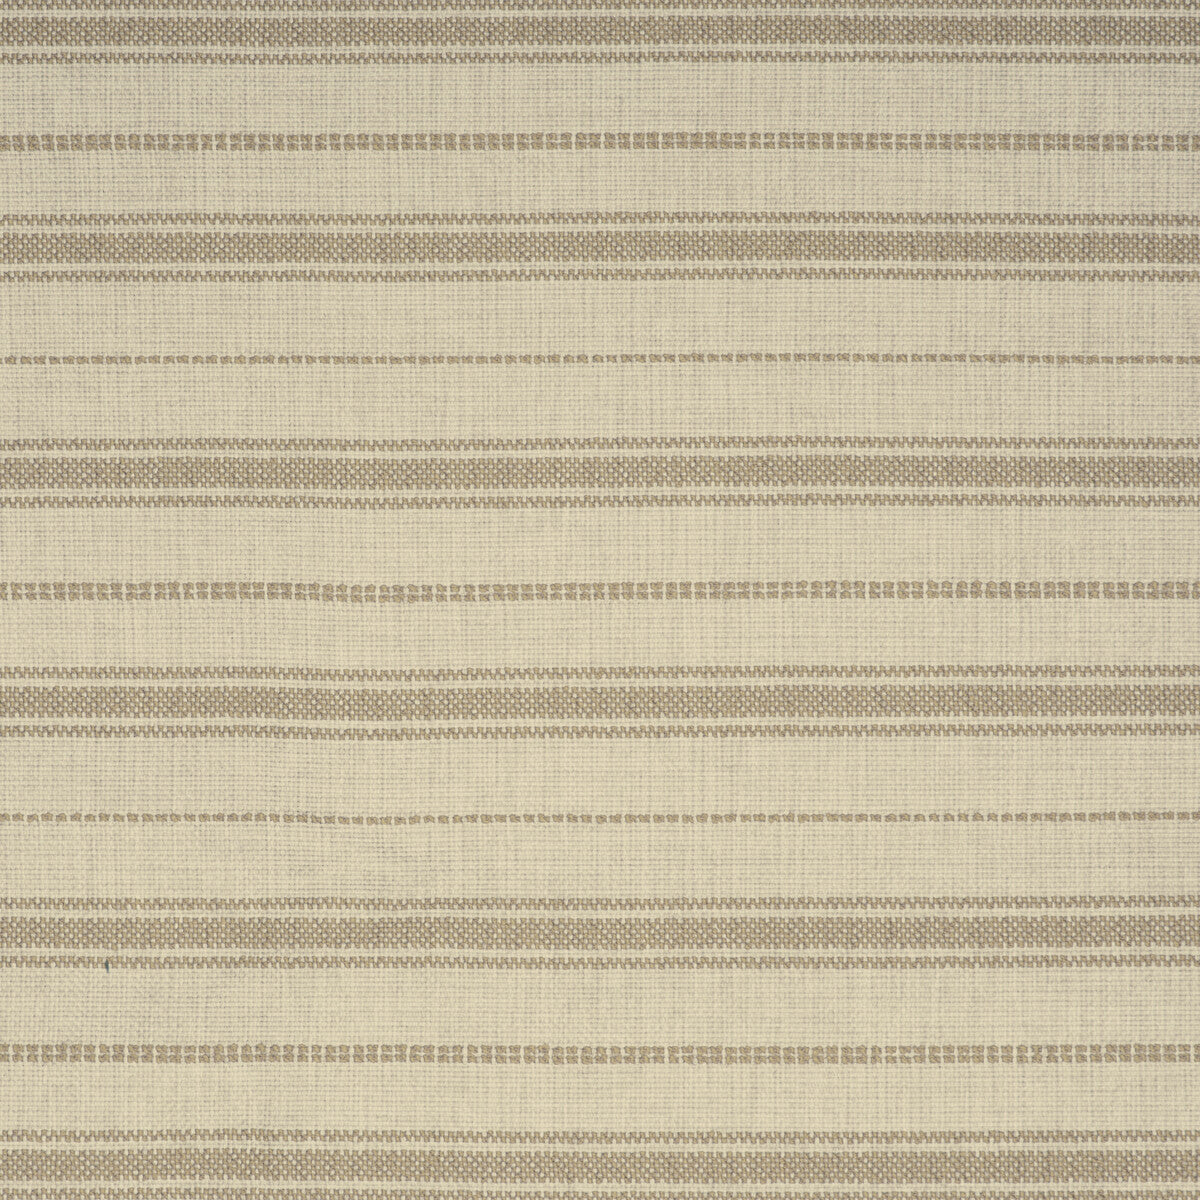 Montpezat Stripe fabric in beige color - pattern 8020136.16.0 - by Brunschwig &amp; Fils in the En Vacances II collection